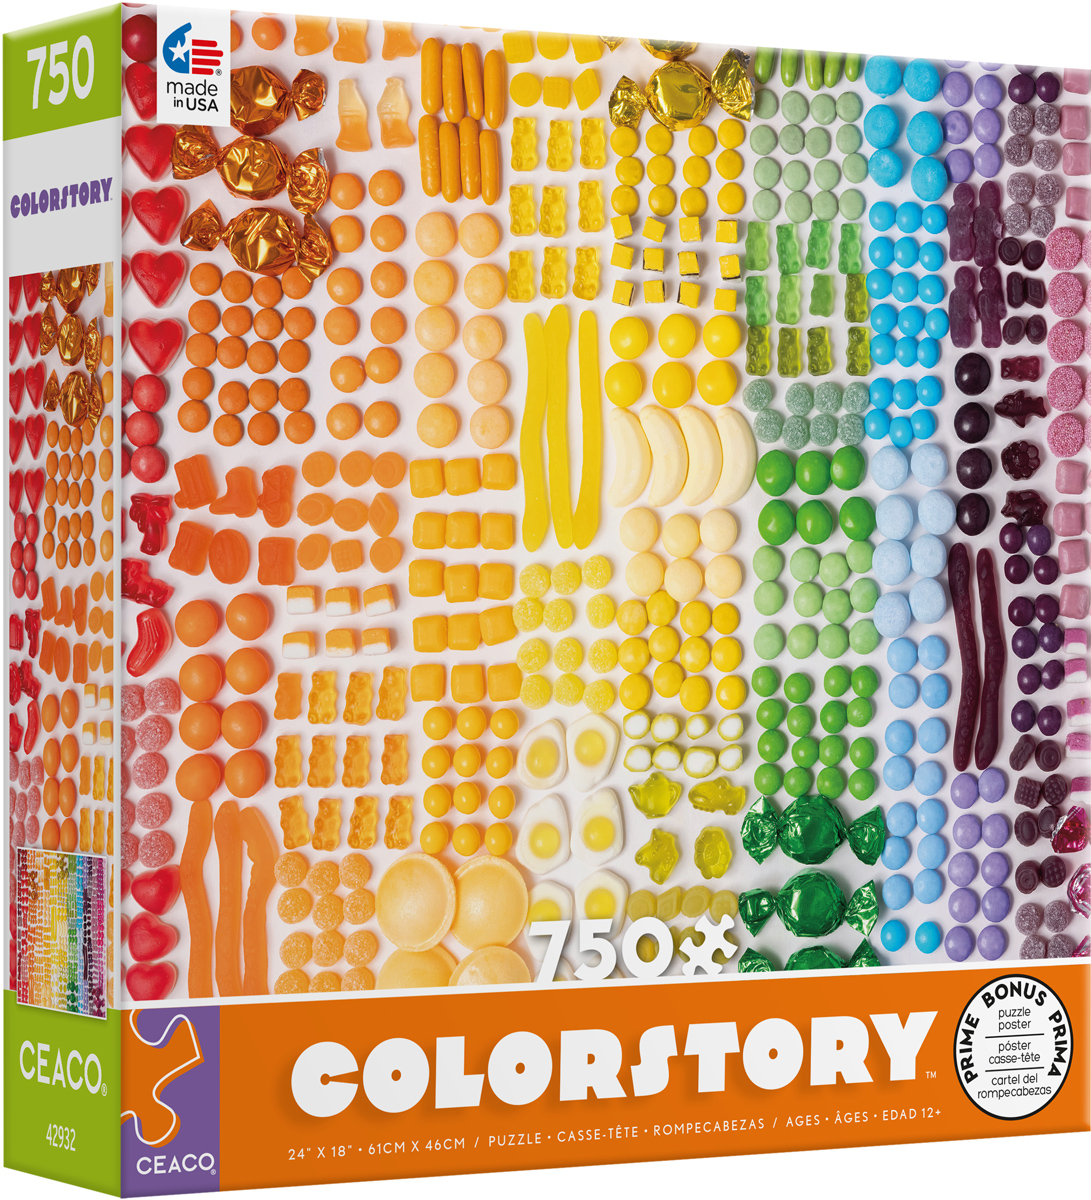 Colorstory - Candy